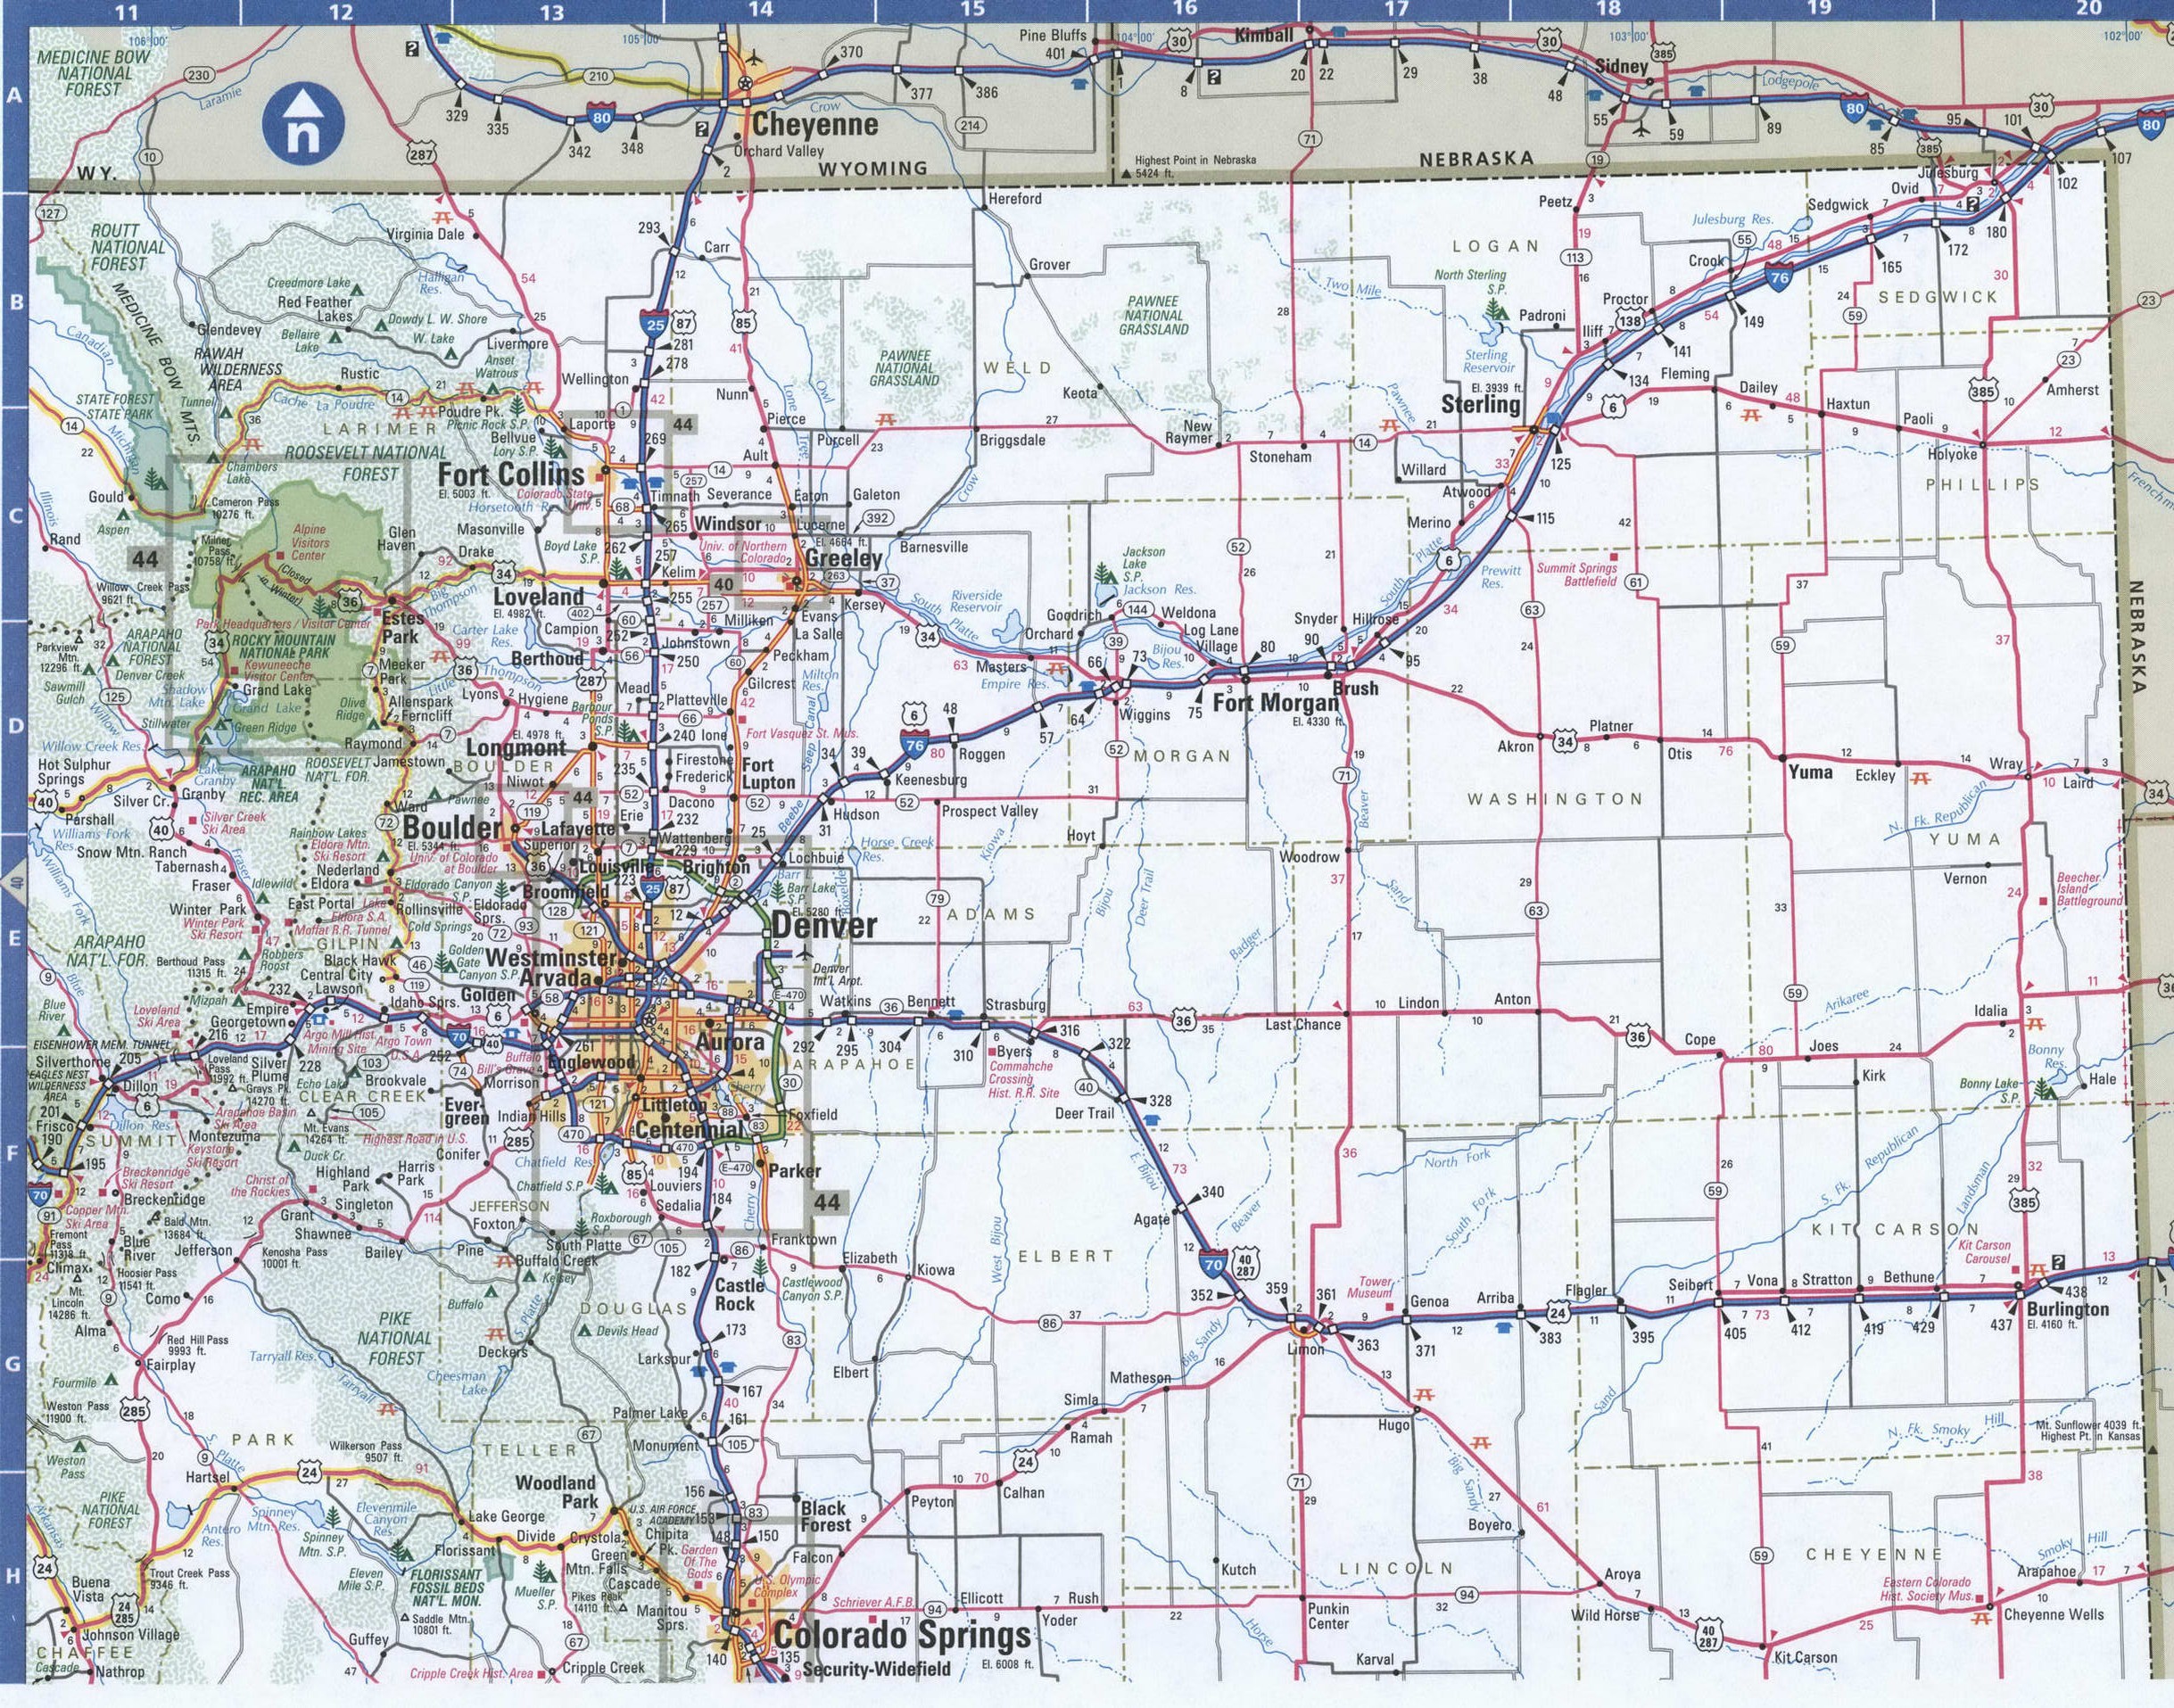 Colorado Eastern detailed road map